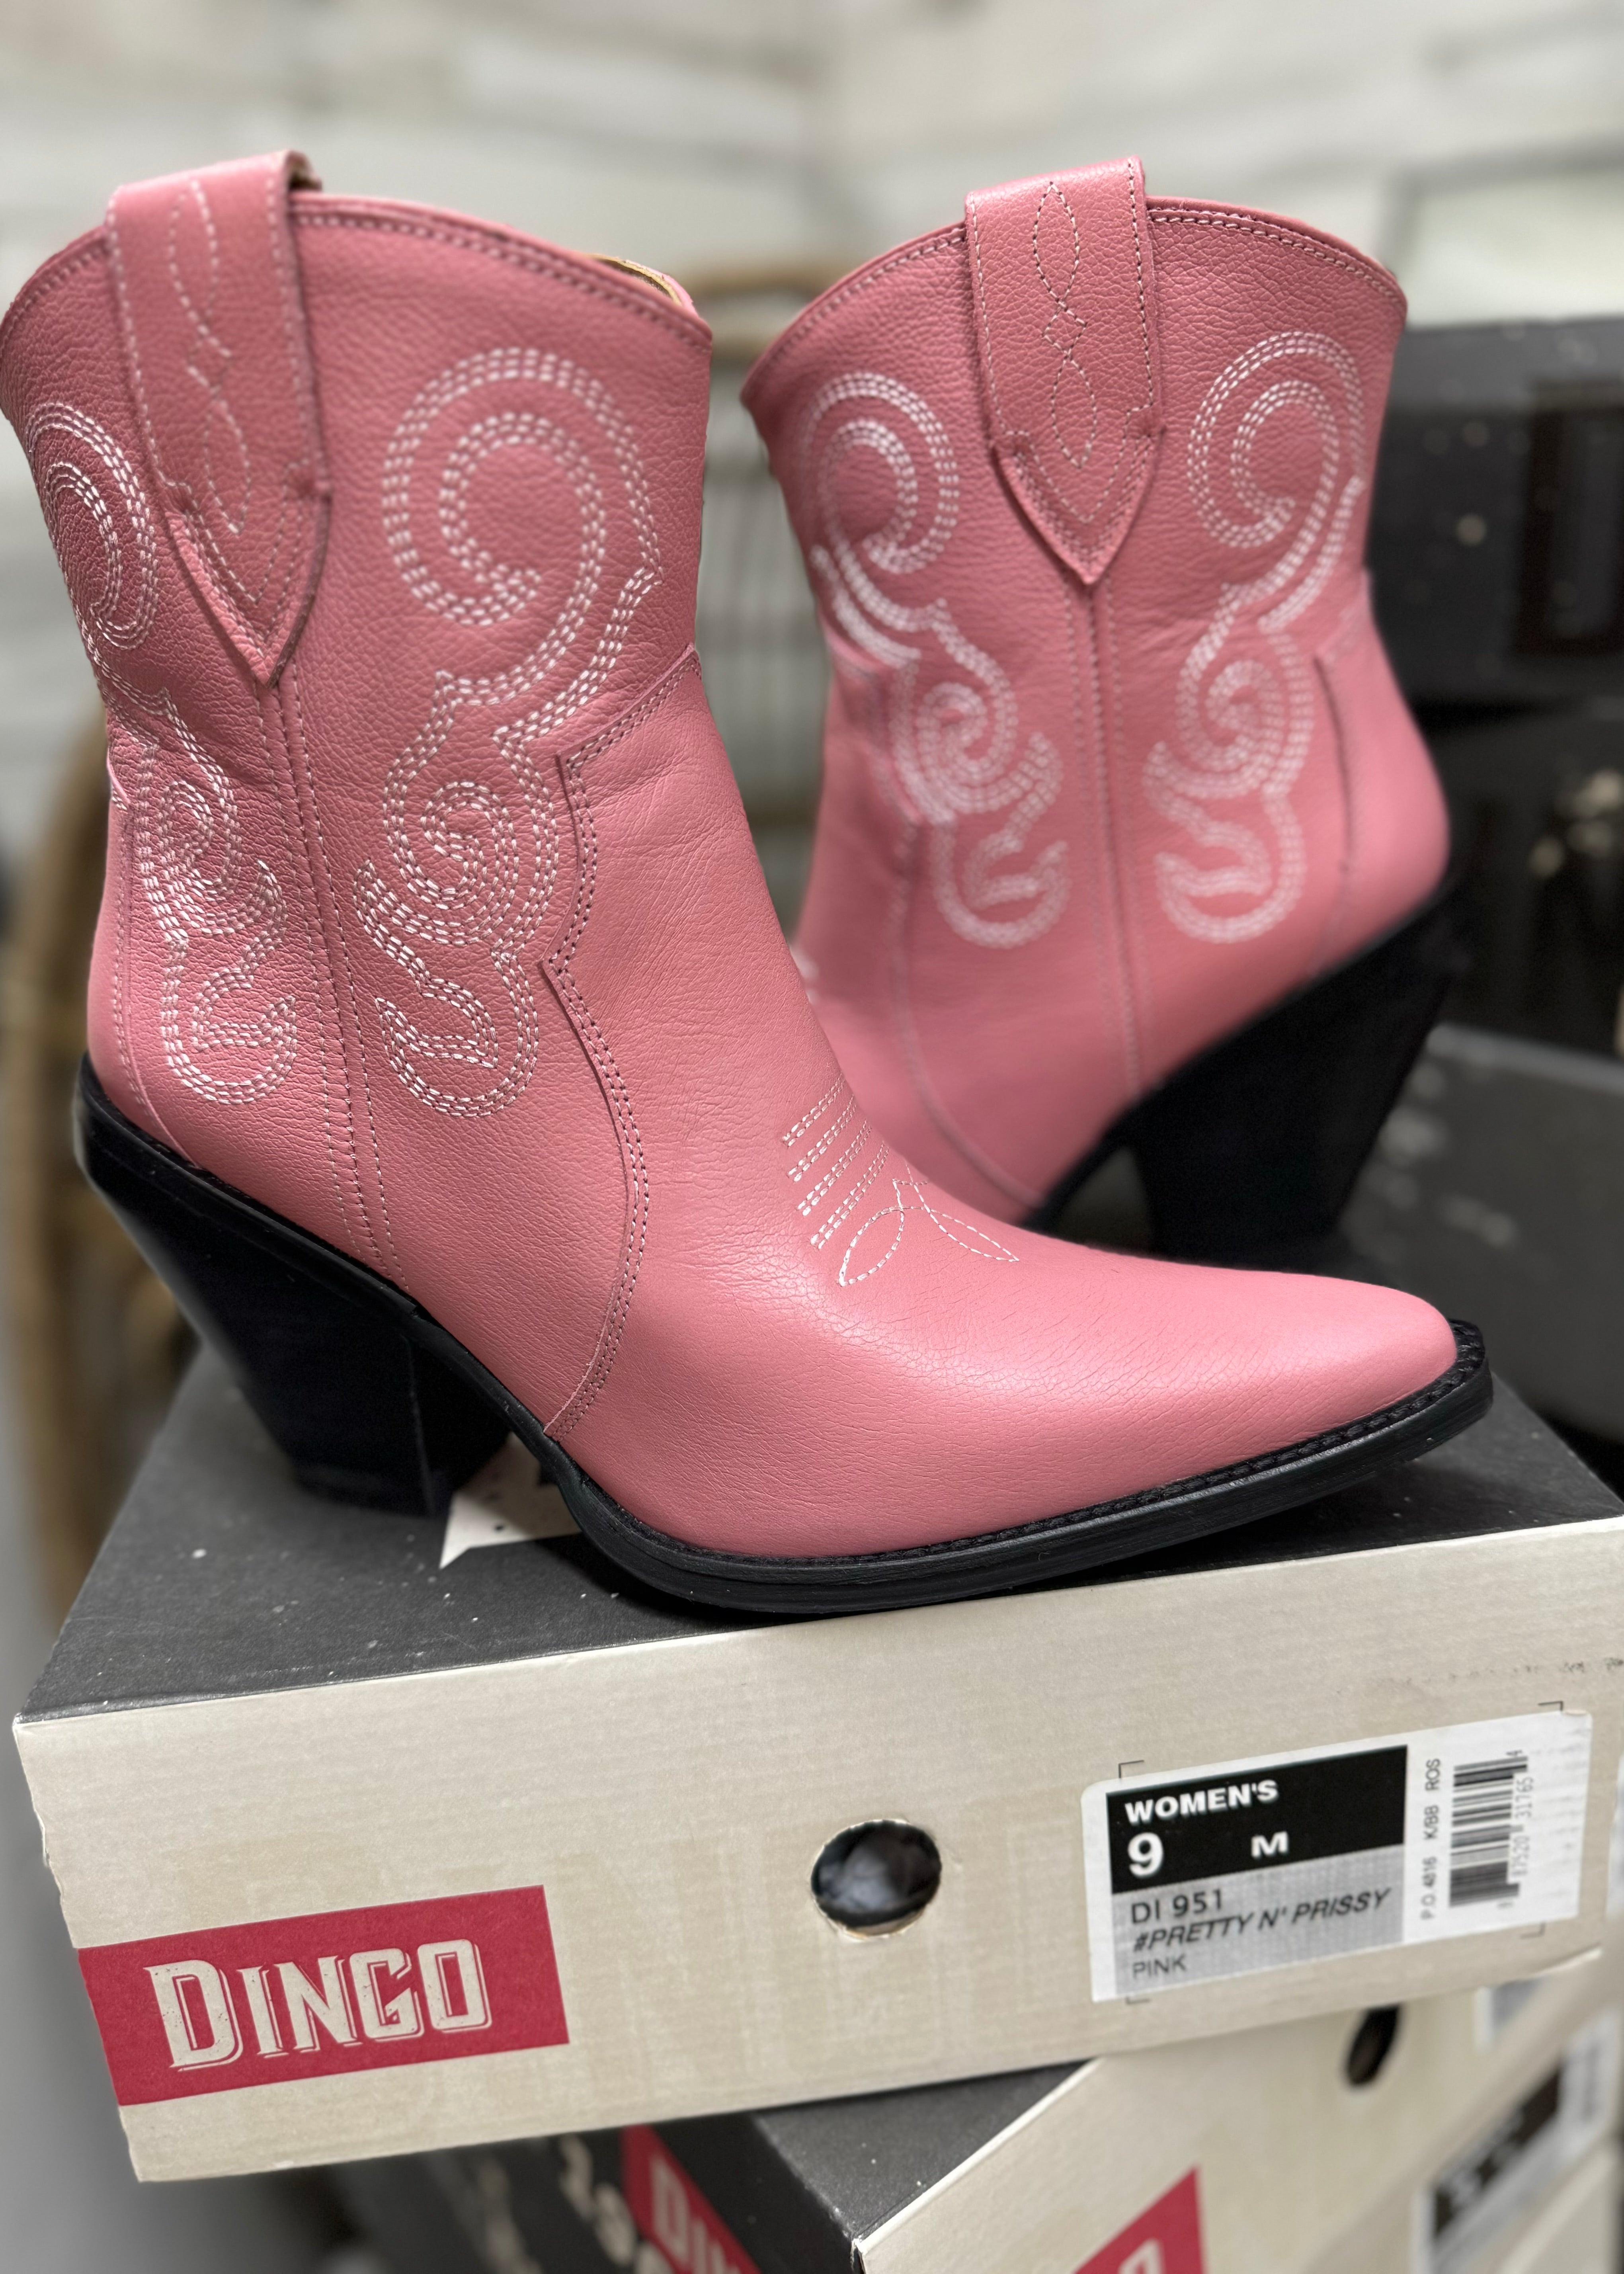 Model Boots Size 9 | Dingo | Pretty N Prissy Leather Bootie in Pink  *DISCONTINUED* - Giddy Up Glamour Boutique